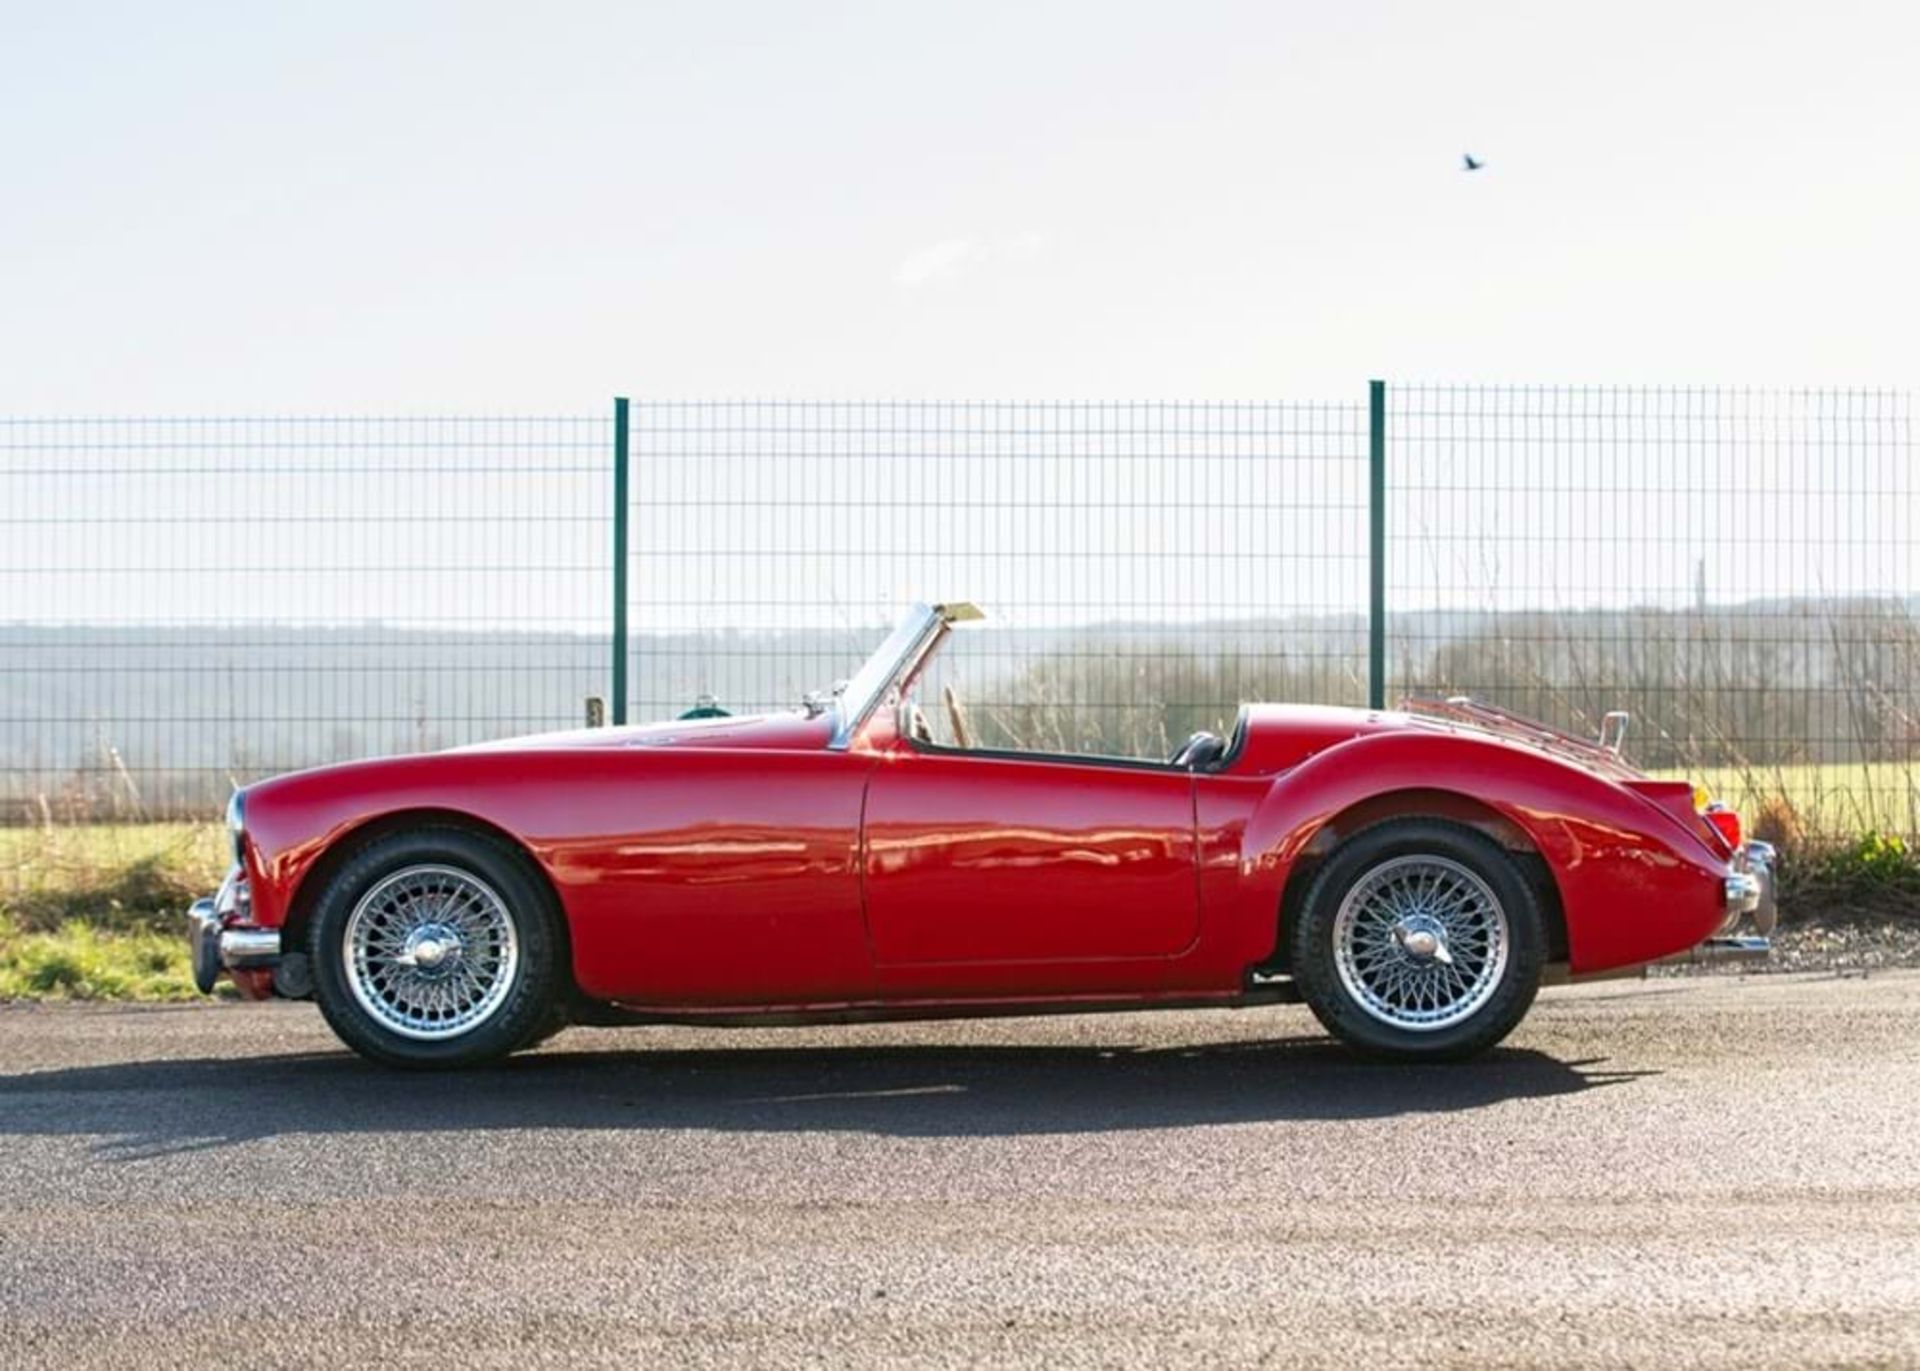 1960 MG A Roadster (Twincam) - Image 10 of 10